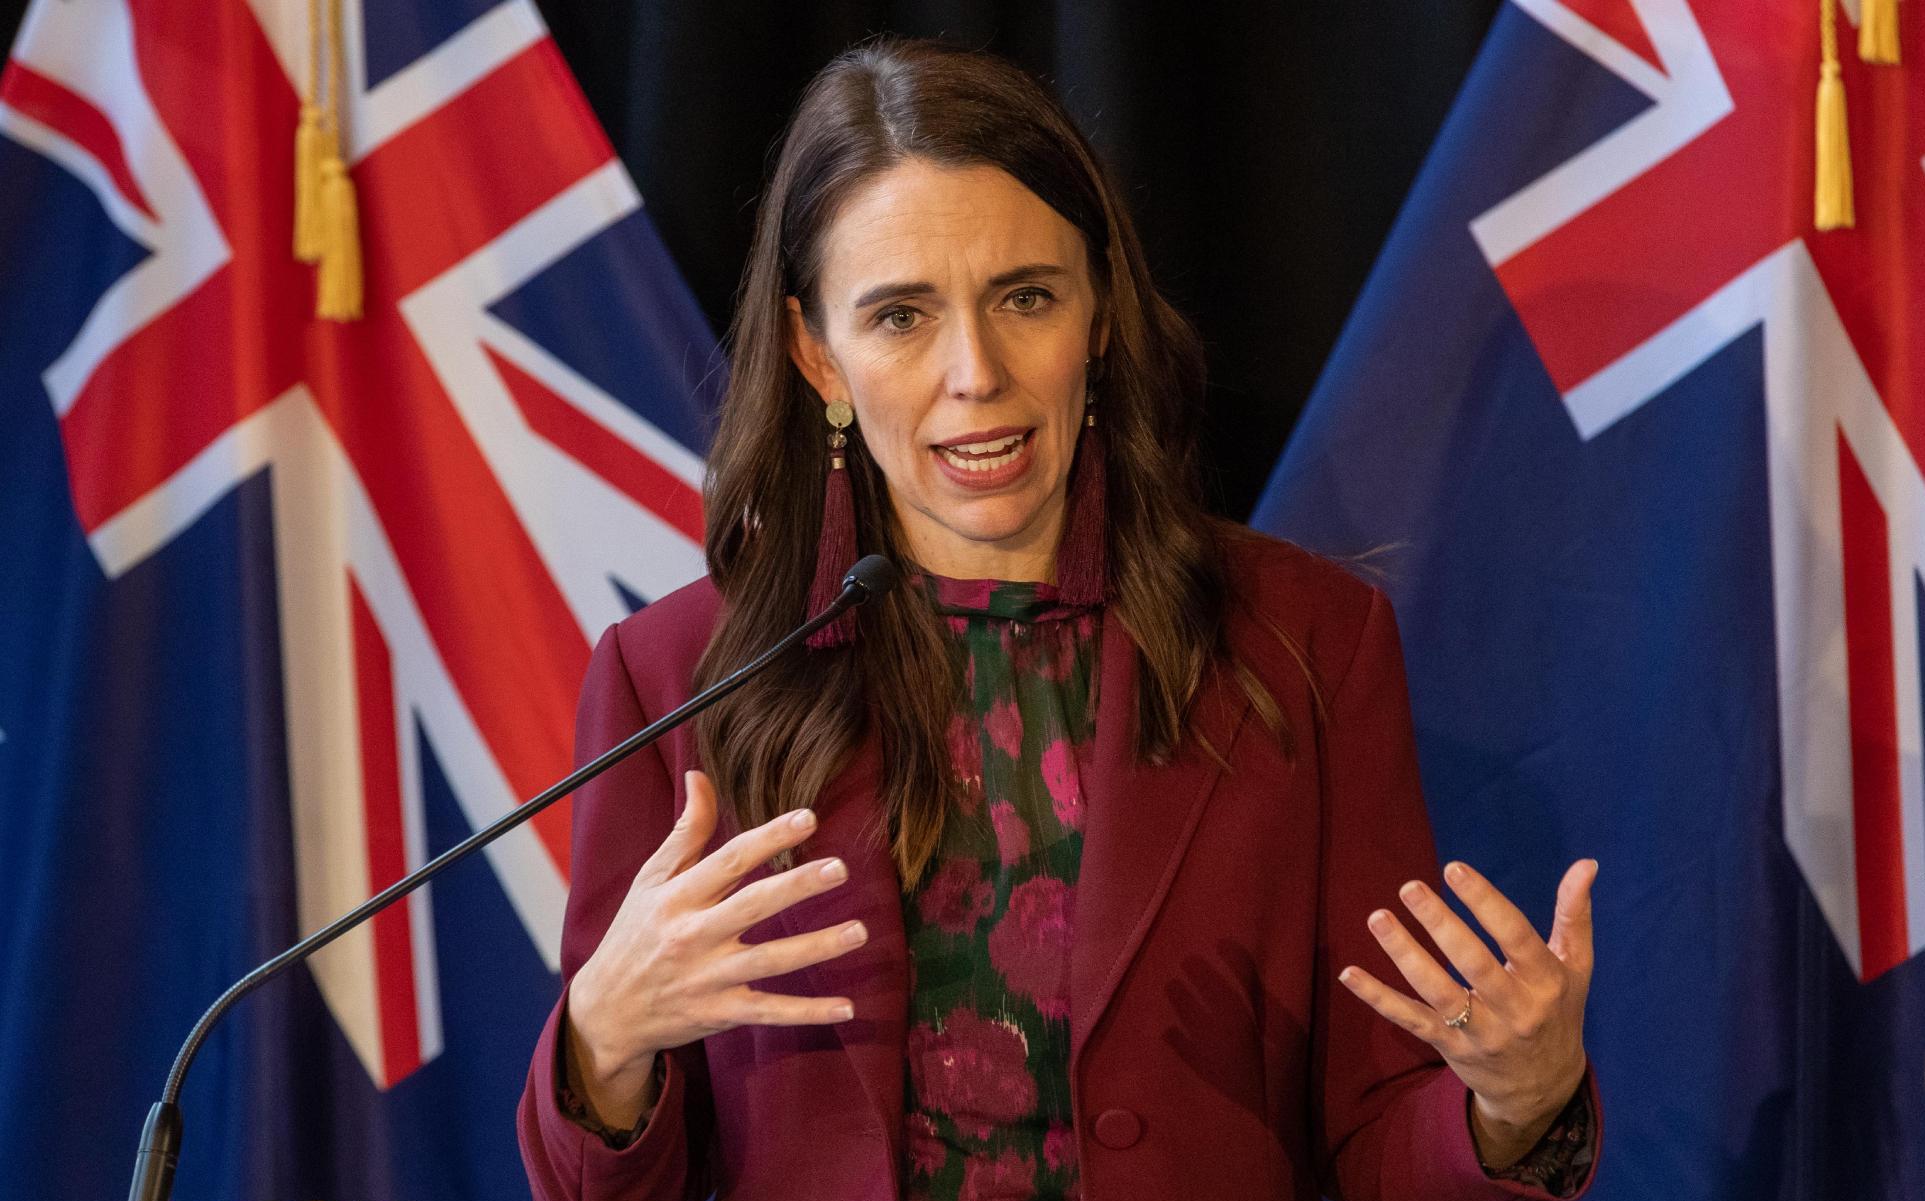 QUEENSTOWN, NEW ZEALAND - MAY 31: New Zealand Prime Minister Jacinda Ardern during the Australia-New Zealand Leaders Meeting on May 31, 2021 in Queenstown, New Zealand. Australian Prime Minister Scott Morrison is on a two-day visit to New Zealand to attend the annual Australia-New Zealand Leaders' Meeting. The trip is Scott Morrison's first overseas visit in 2021. (Photo by James Allan/Getty Images)